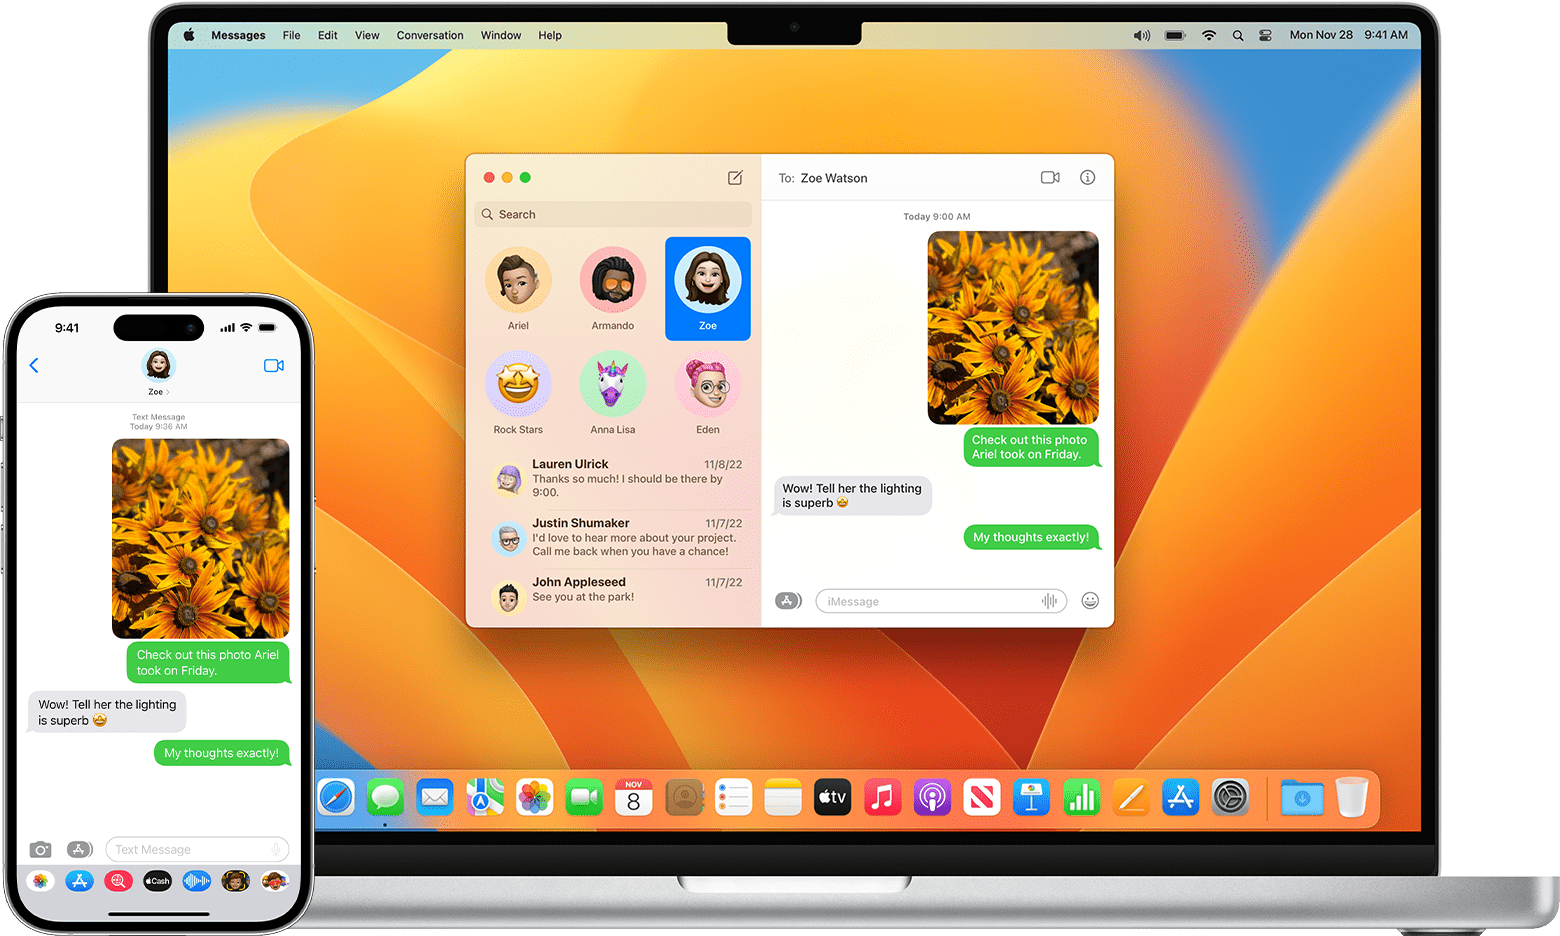 macos-ventura-macbook-pro-16in-ios-16-iphone-14-pro-messages-forward-sms-mms-texts-from-iphone-to-mac-ipad-hero